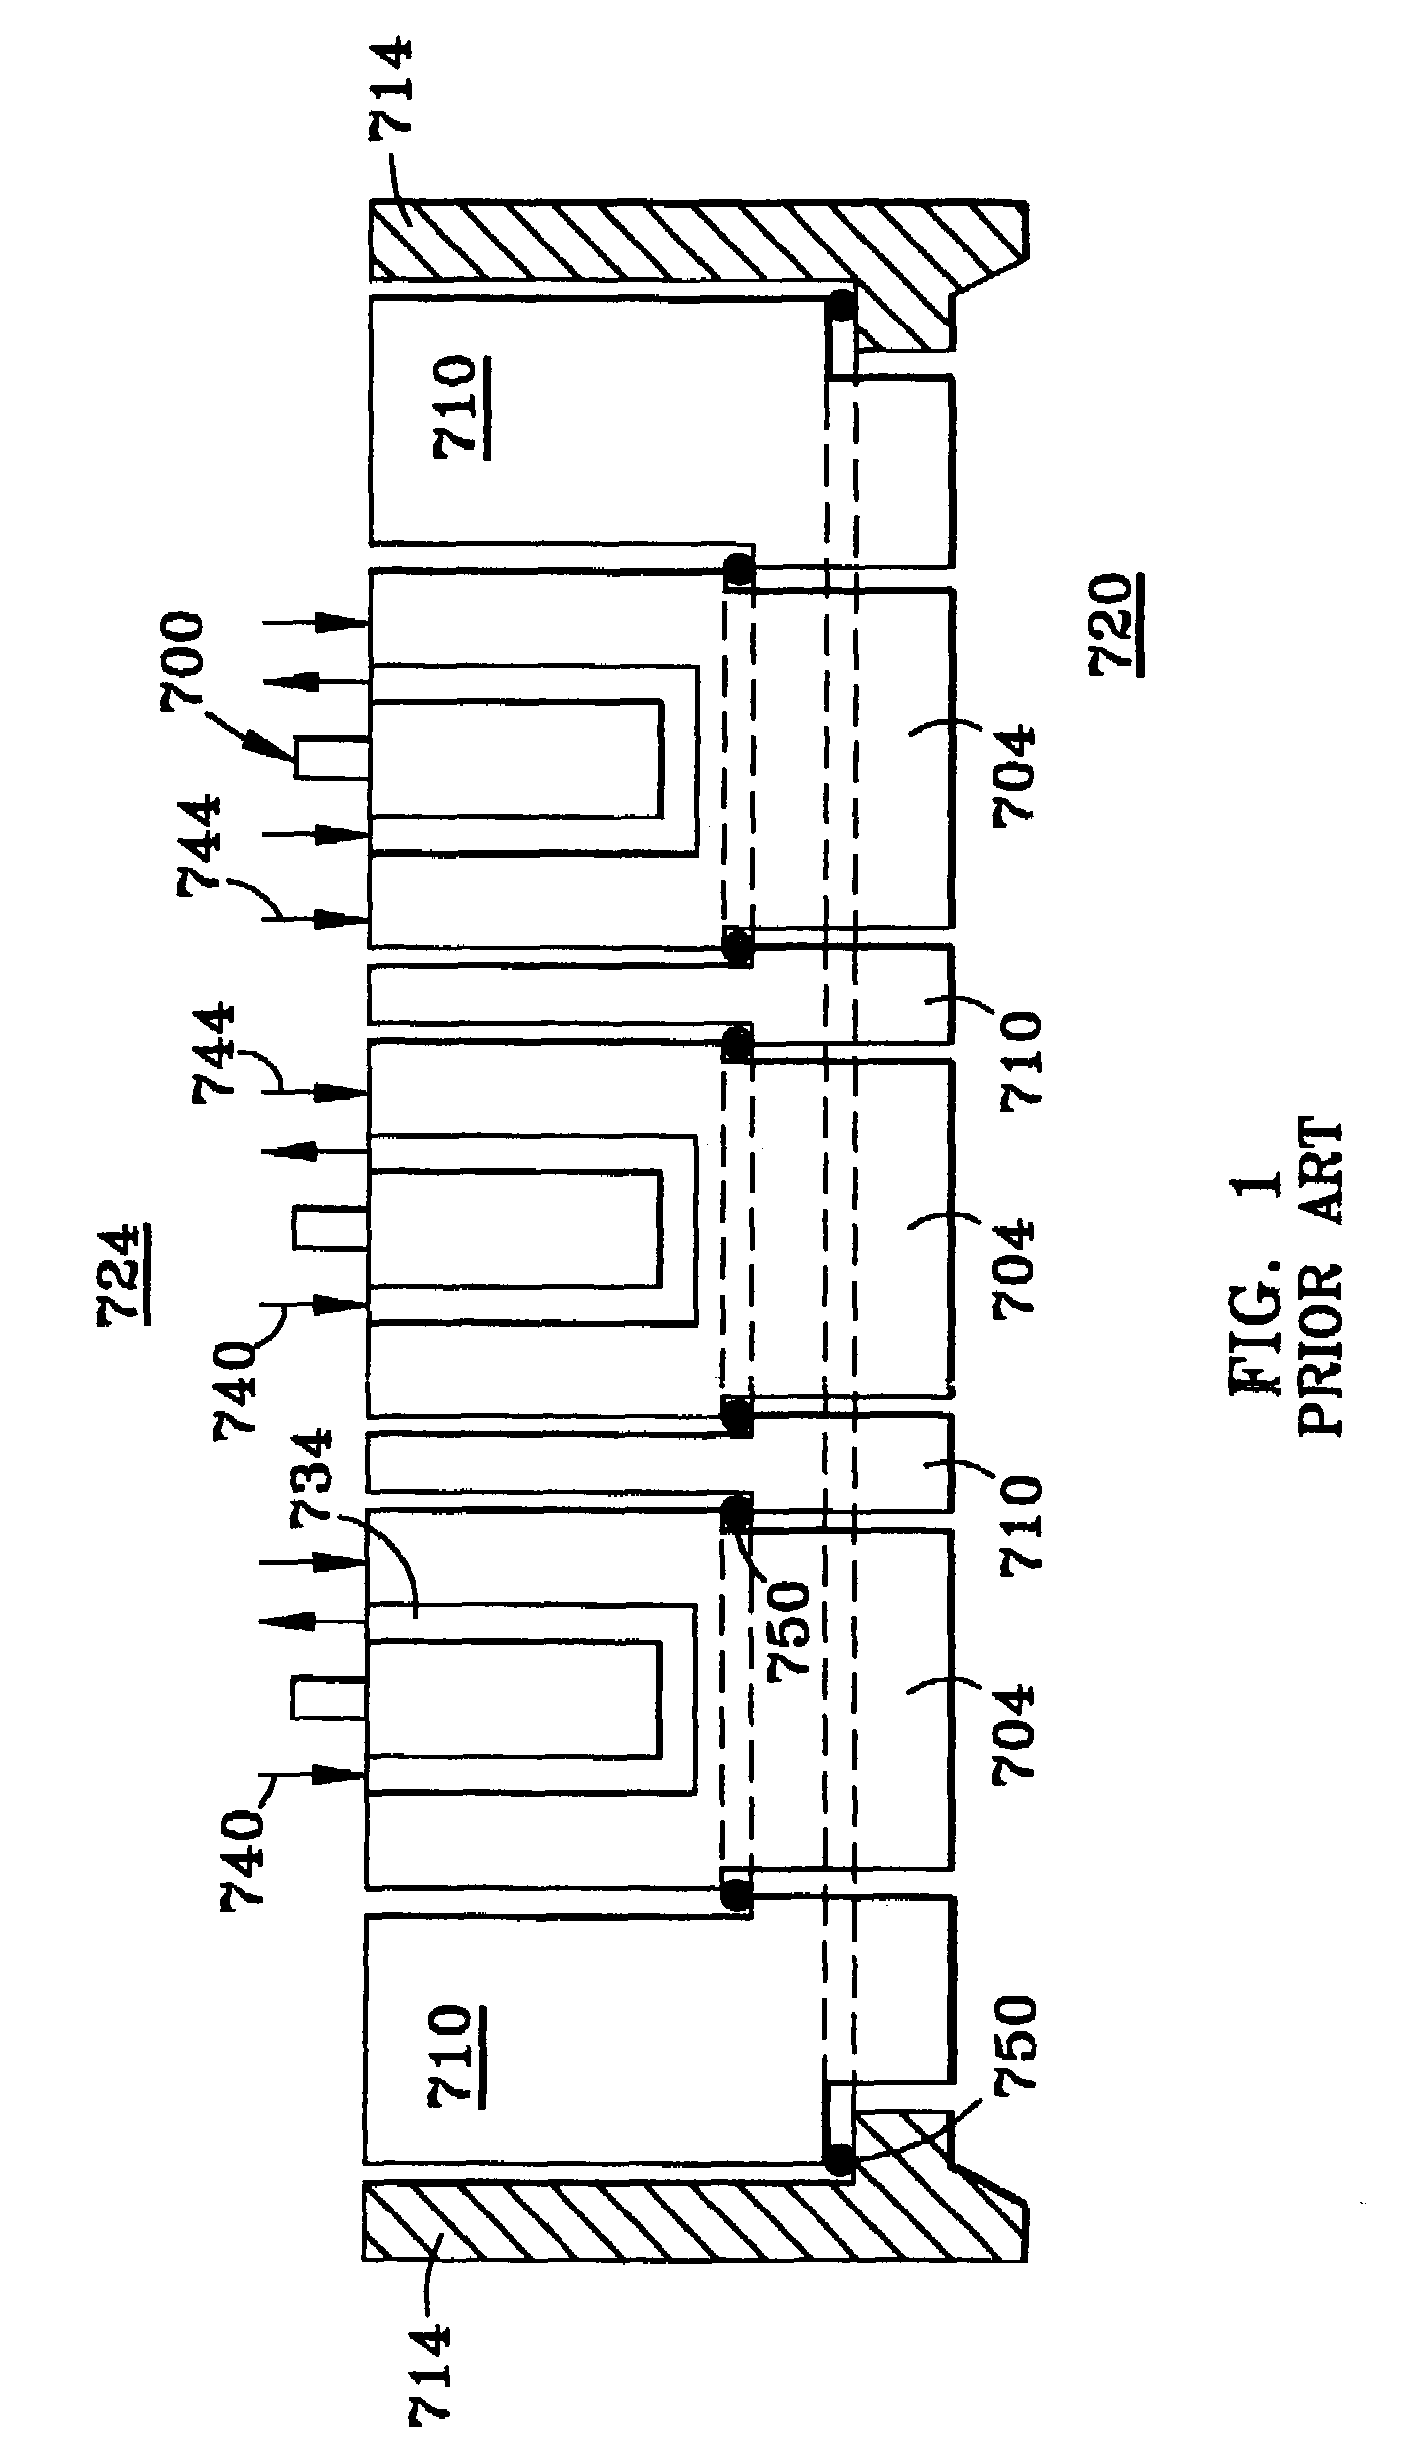 Controlled method for segmented electrode apparatus and method for plasma processing